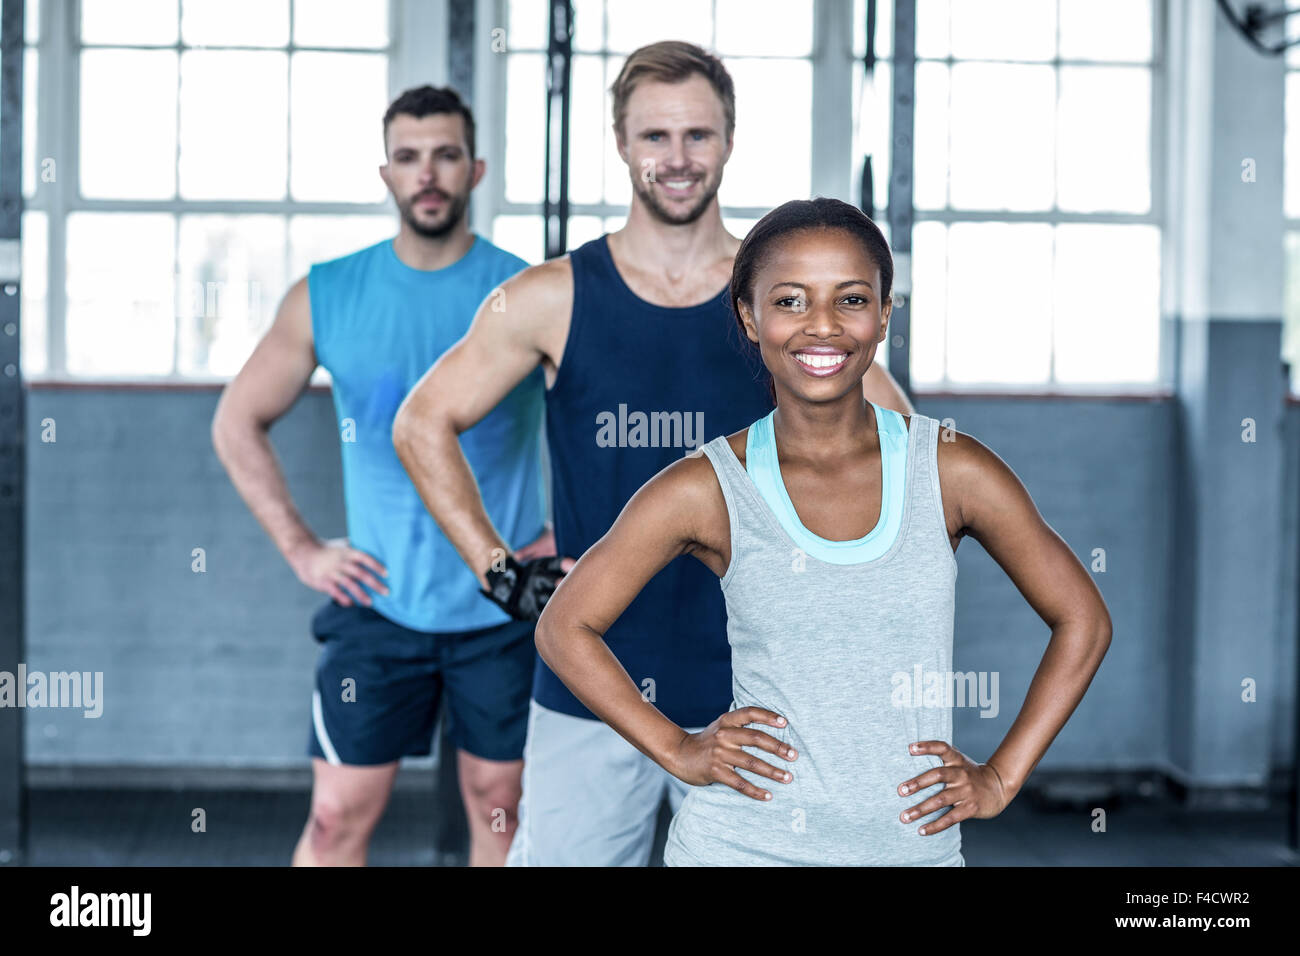 Fit people posing face to the camera Stock Photo